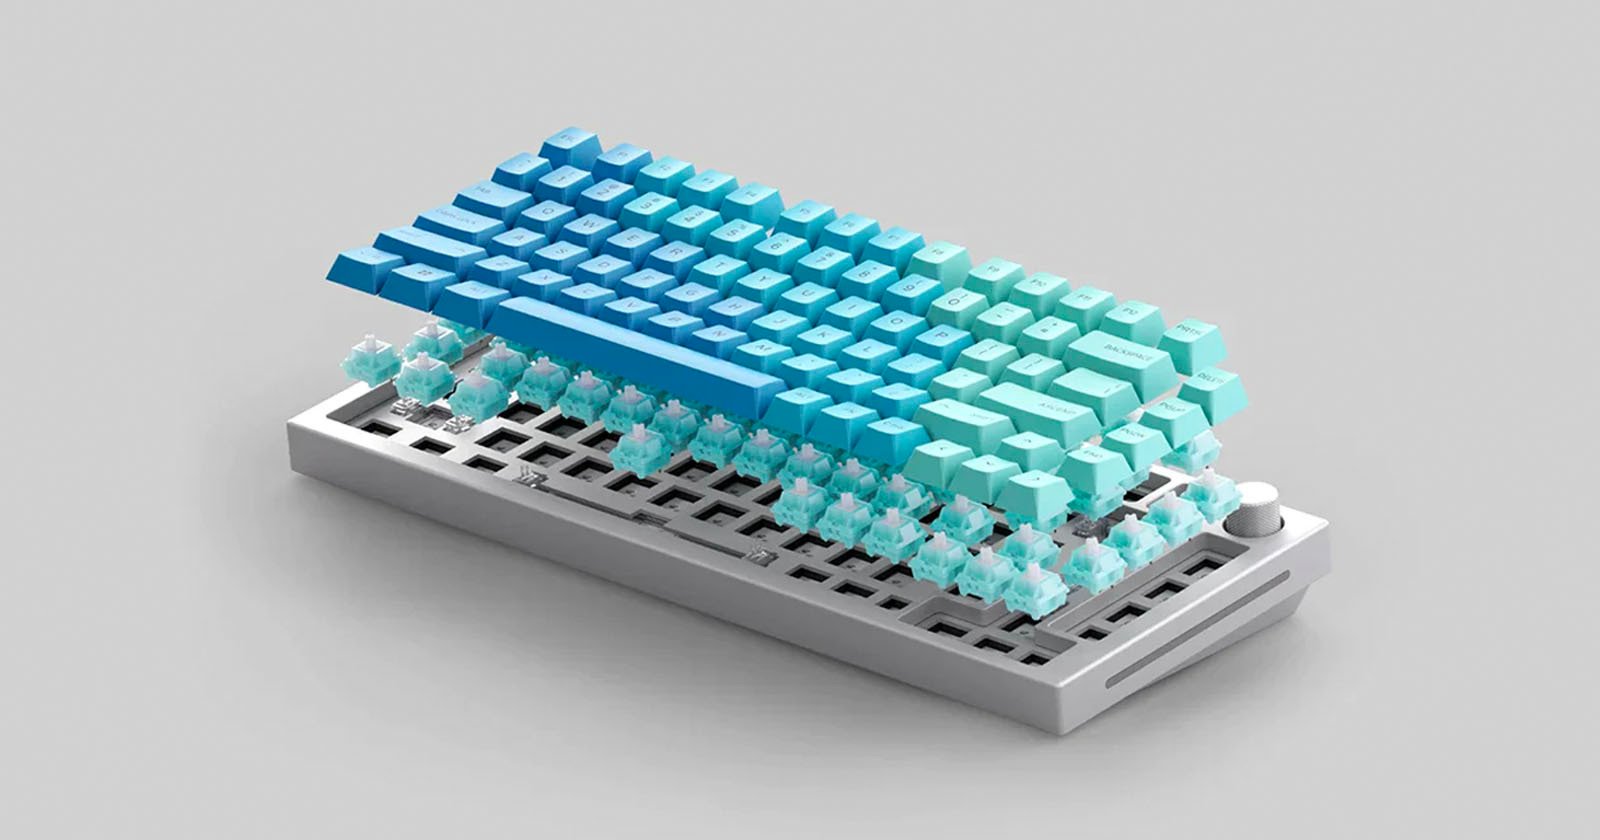 A photo of the GMMK Pro mechanical keyboard depicts multiple parts hovering above the other.